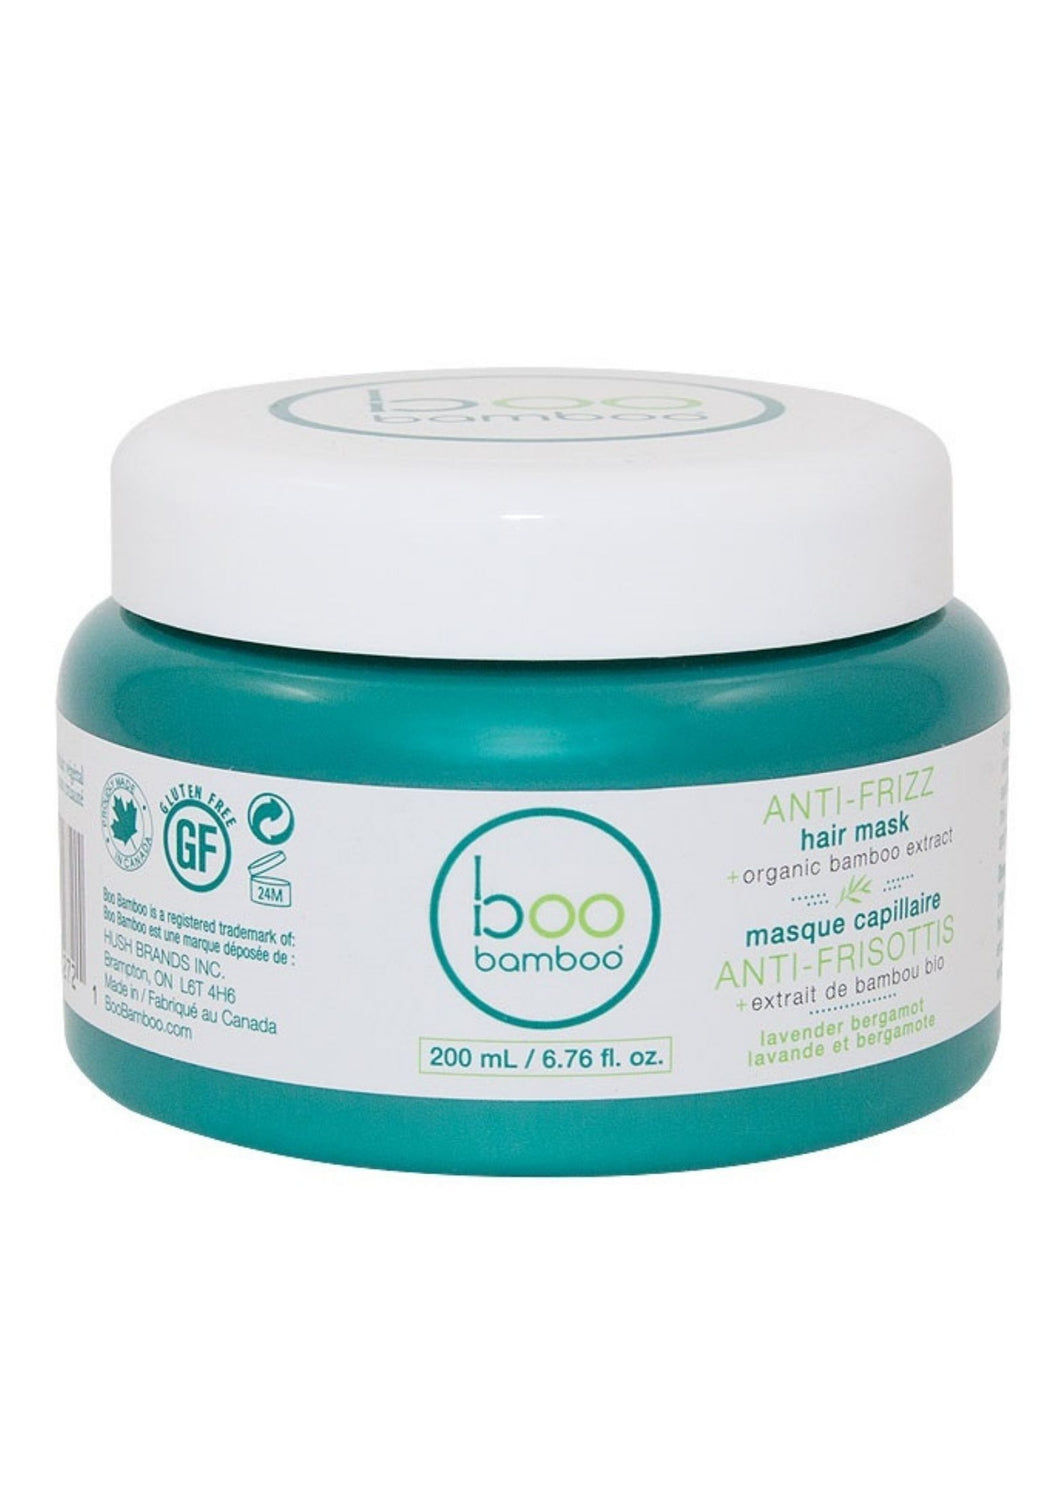 Frizzy and unruly hair are no match for boo bamboo's intensely calming treatment. It smooths and soothes damaged hair strands, while stabilizing the cuticle and nurturing hair with natural oils and bamboo silica. (200ml) $20.00